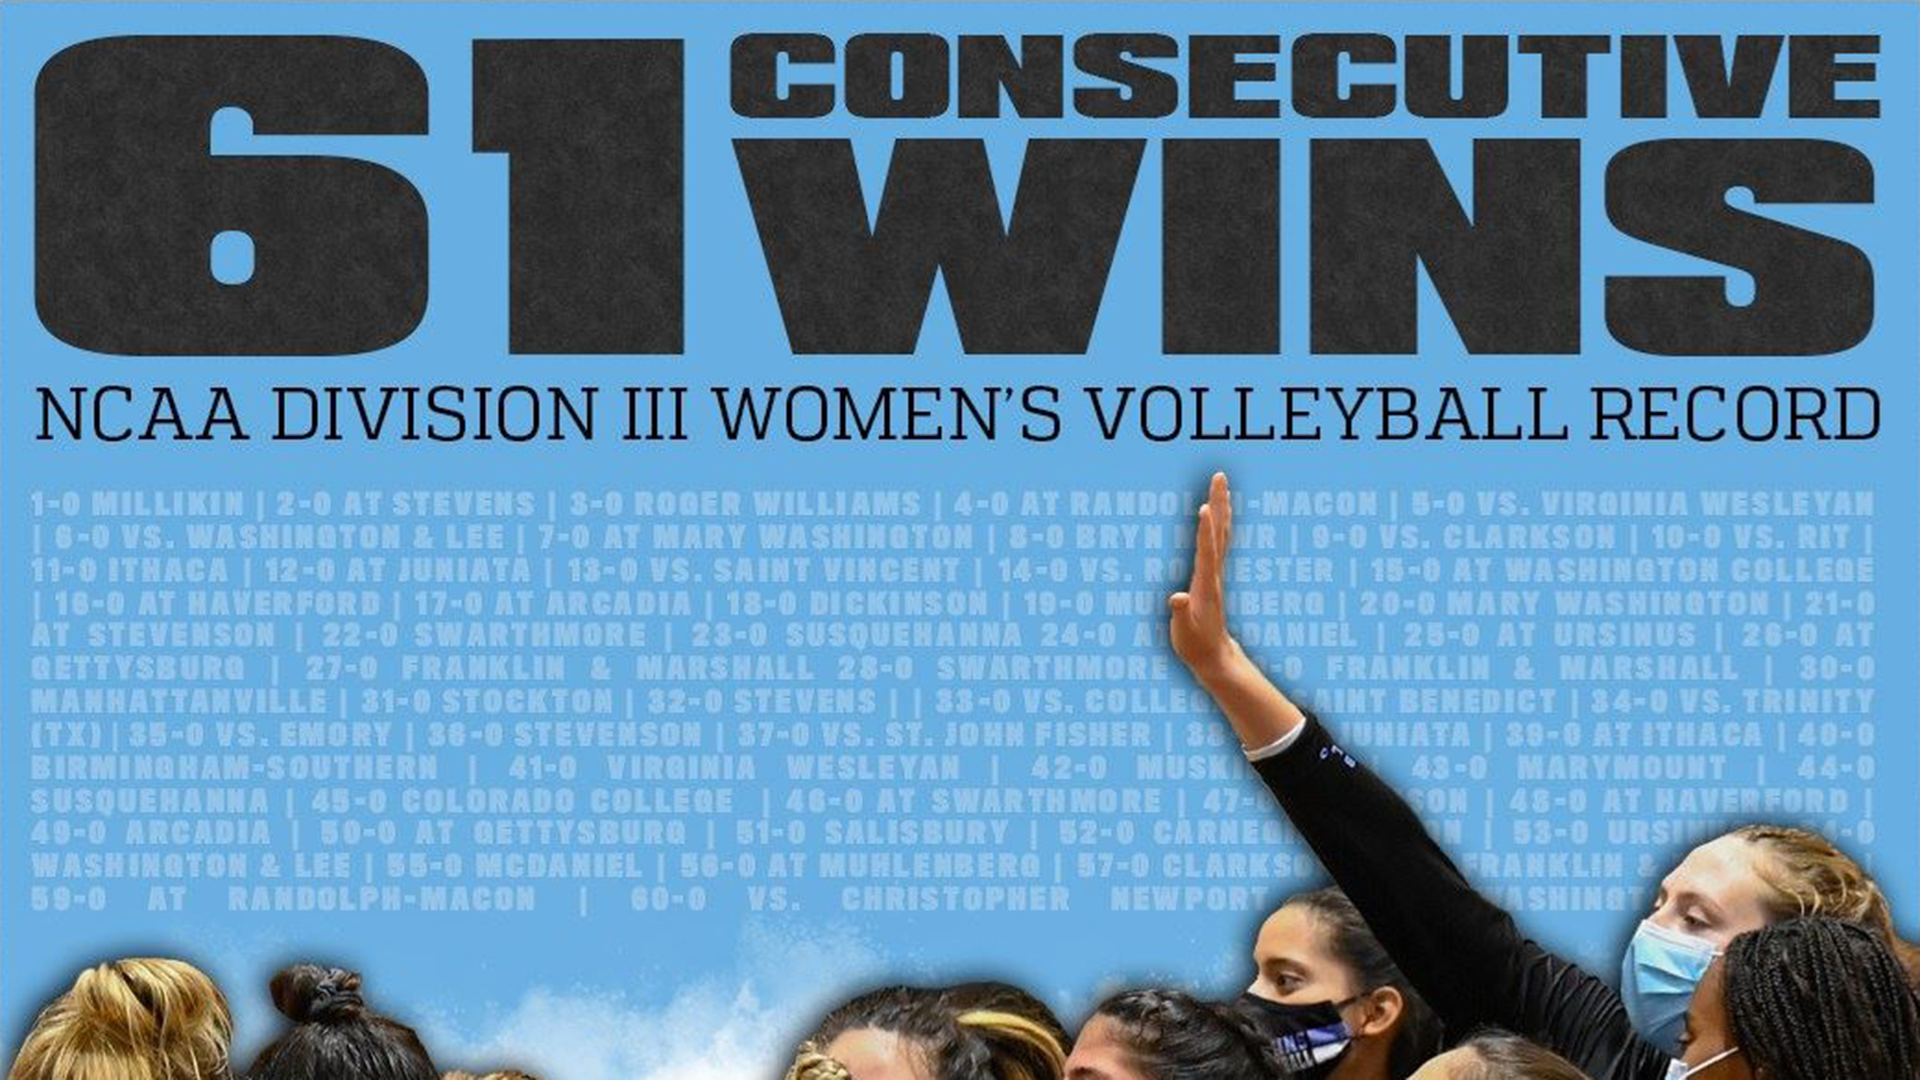 Hopkins Volleyball Wins 61st Straight, Sets NCAA Division III Record